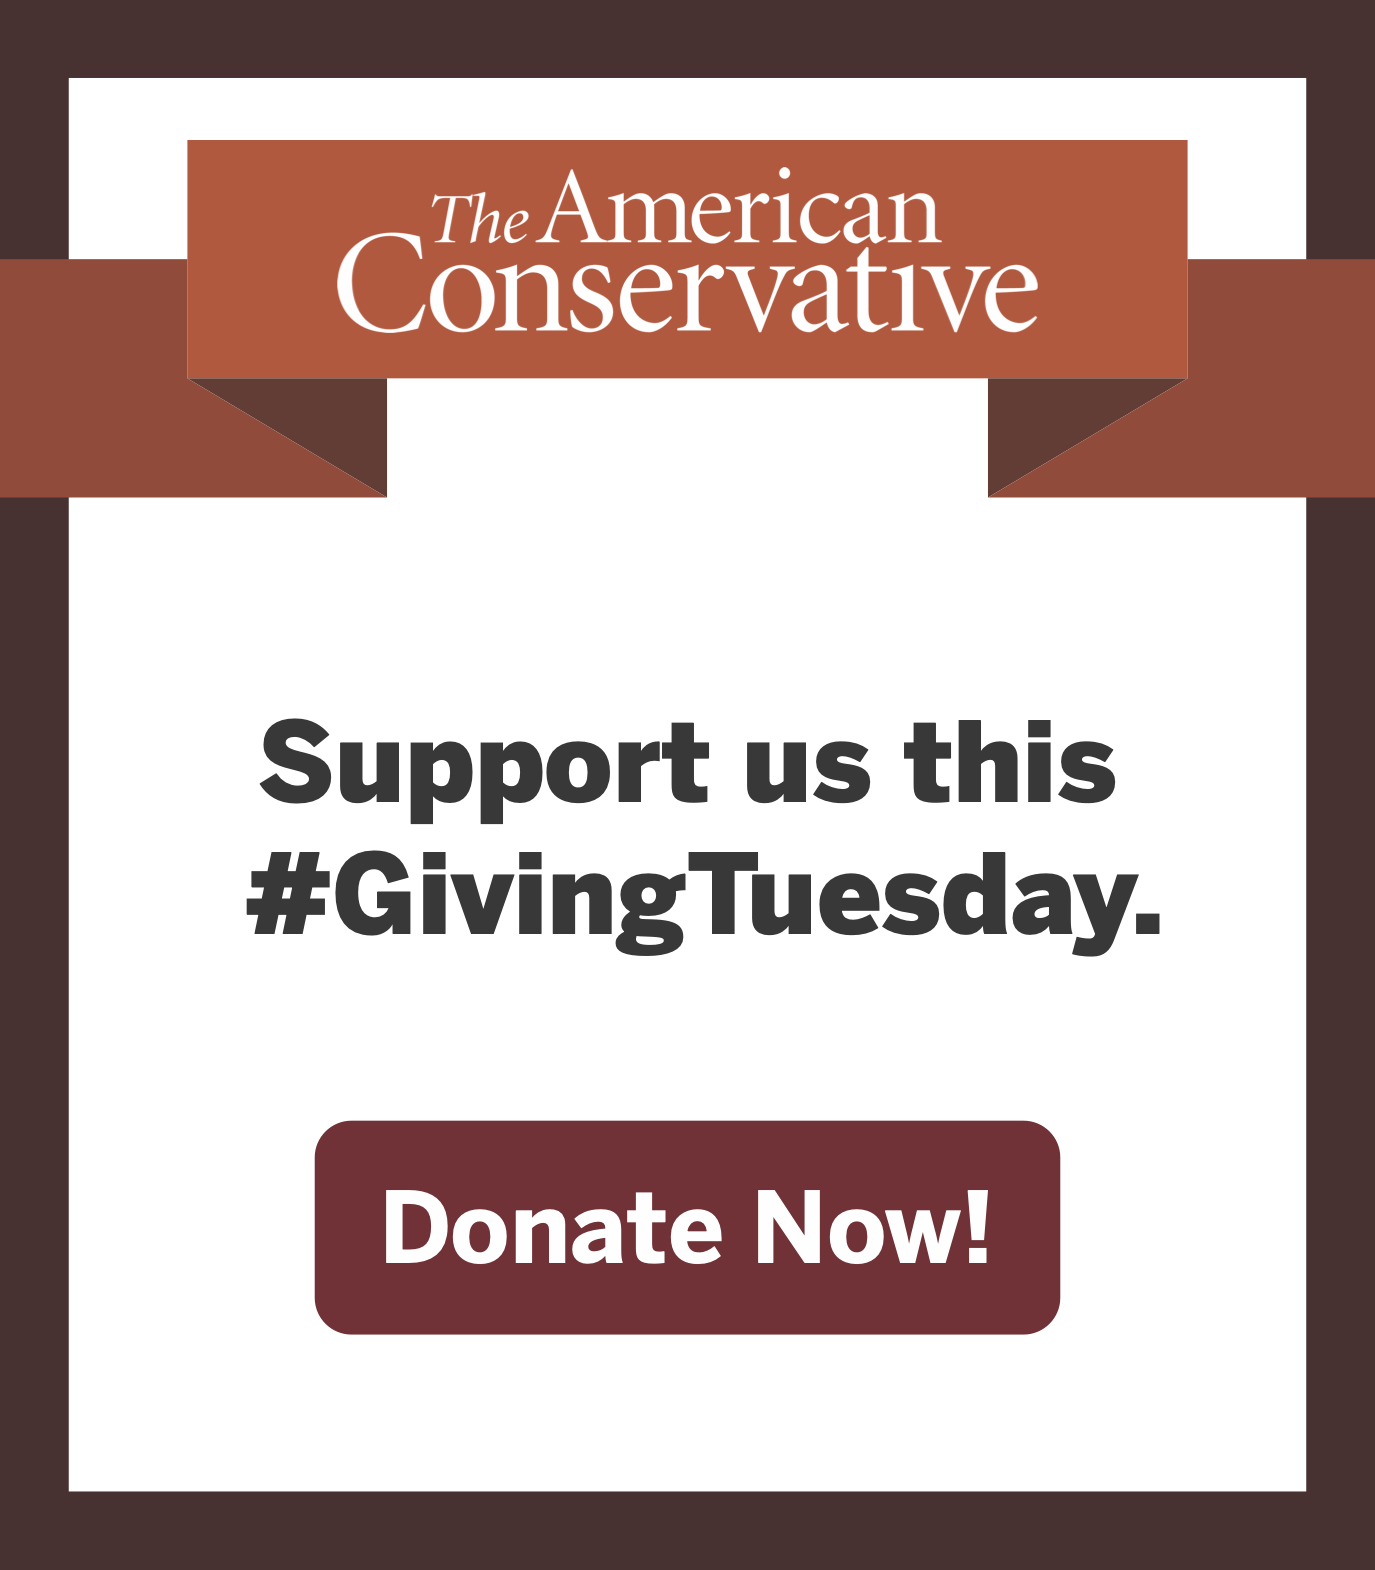 Click here to Donate to The American Conservative for Giving Tuesday